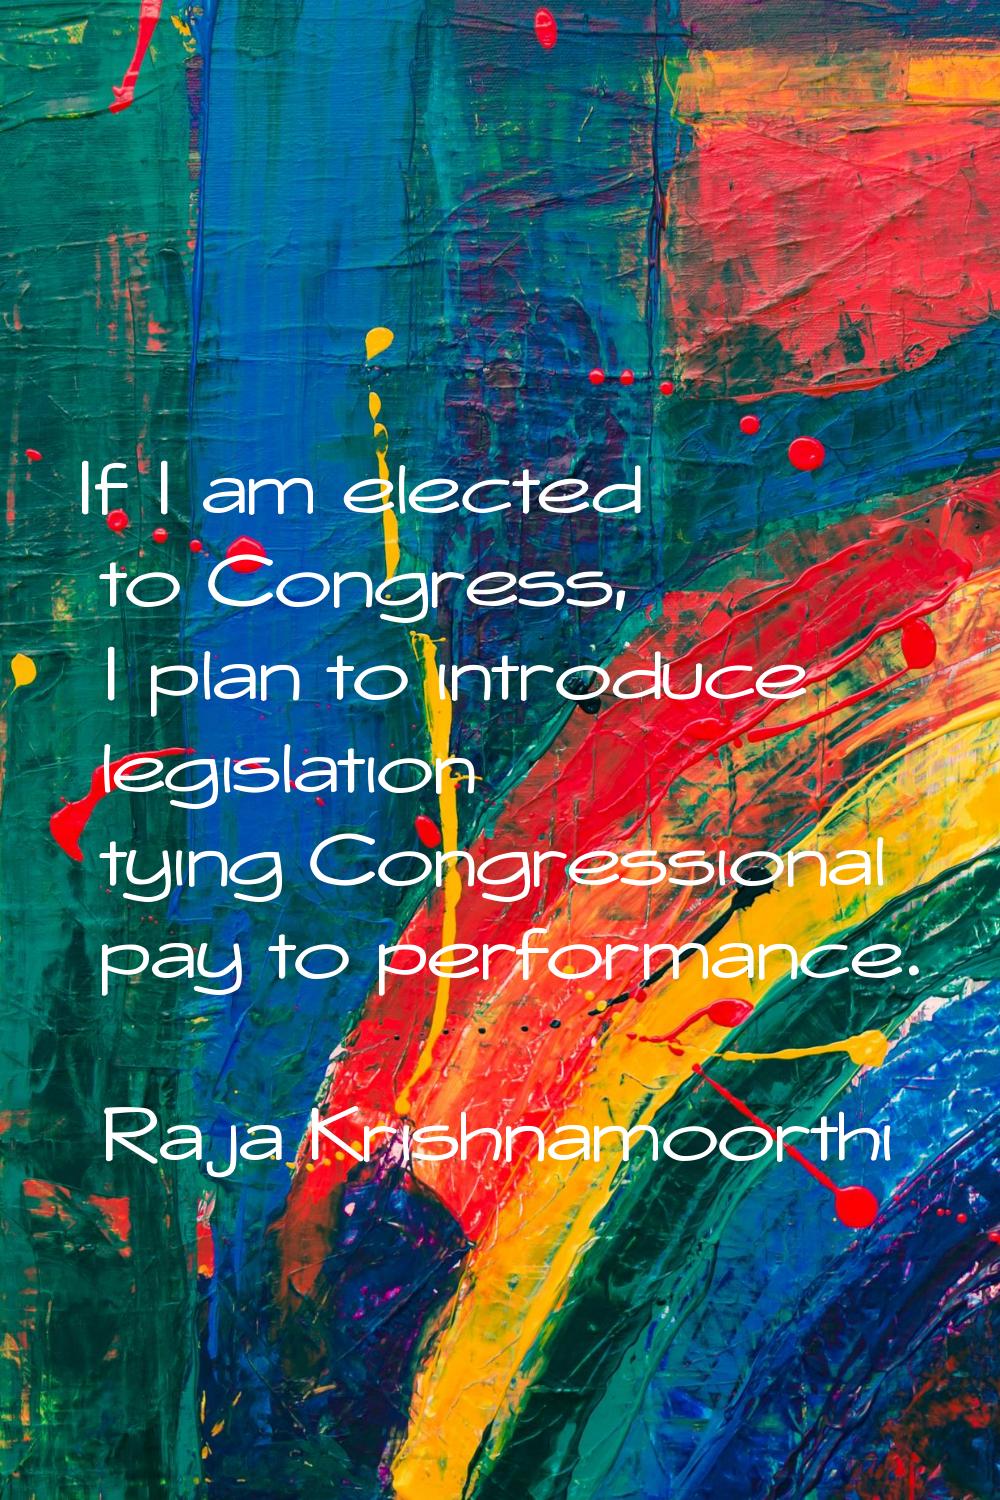 If I am elected to Congress, I plan to introduce legislation tying Congressional pay to performance